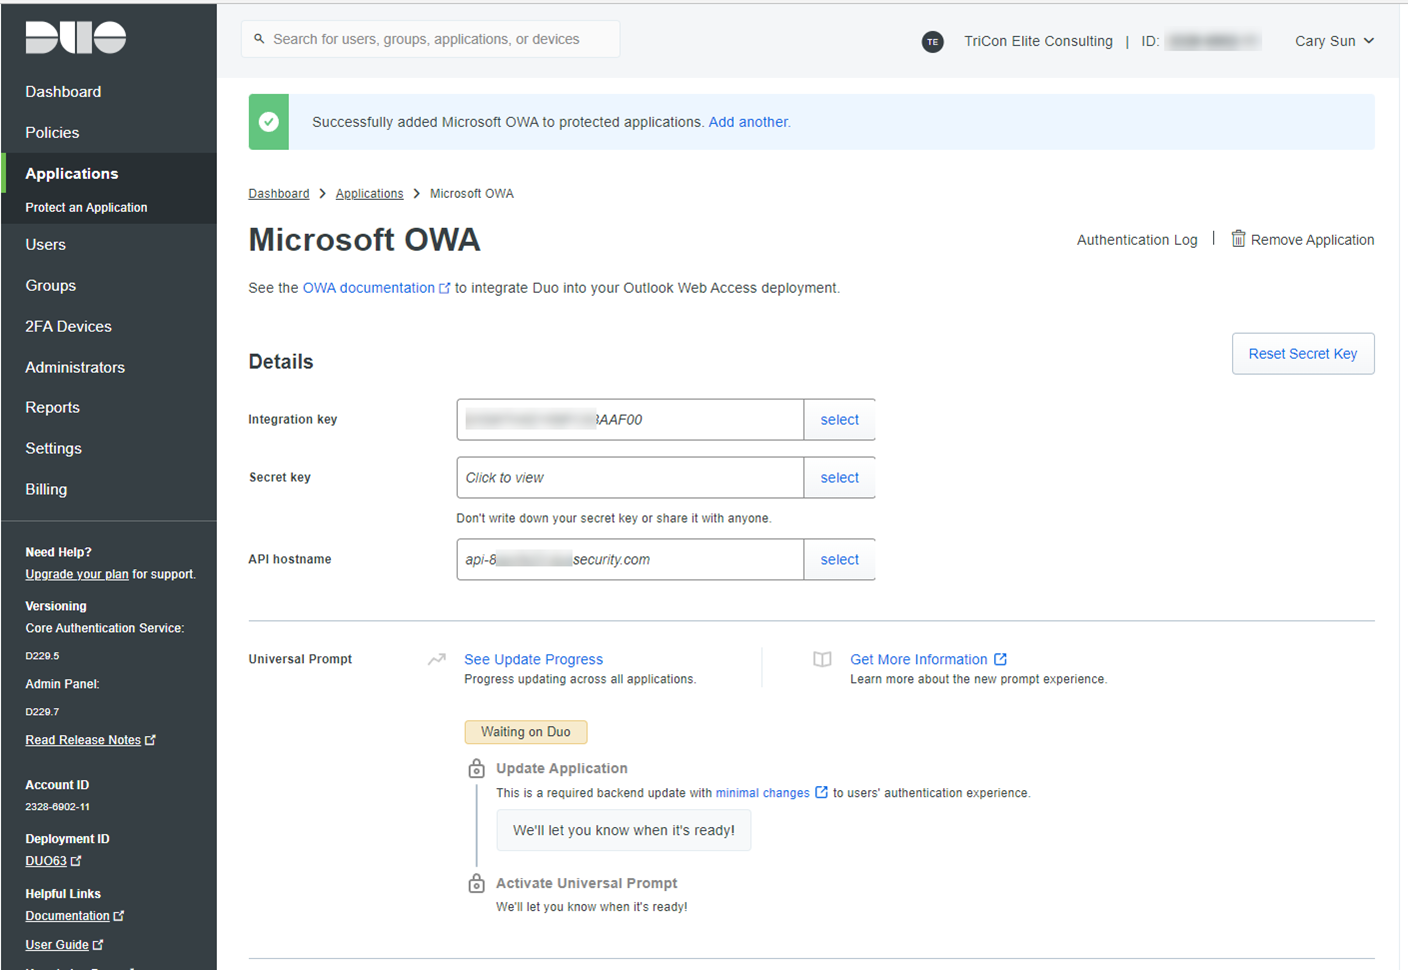 122821 2015 Howtoconfig8 - How to configure Cisco DUO for Outlook Web App (OWA) of Exchange 2013 and later